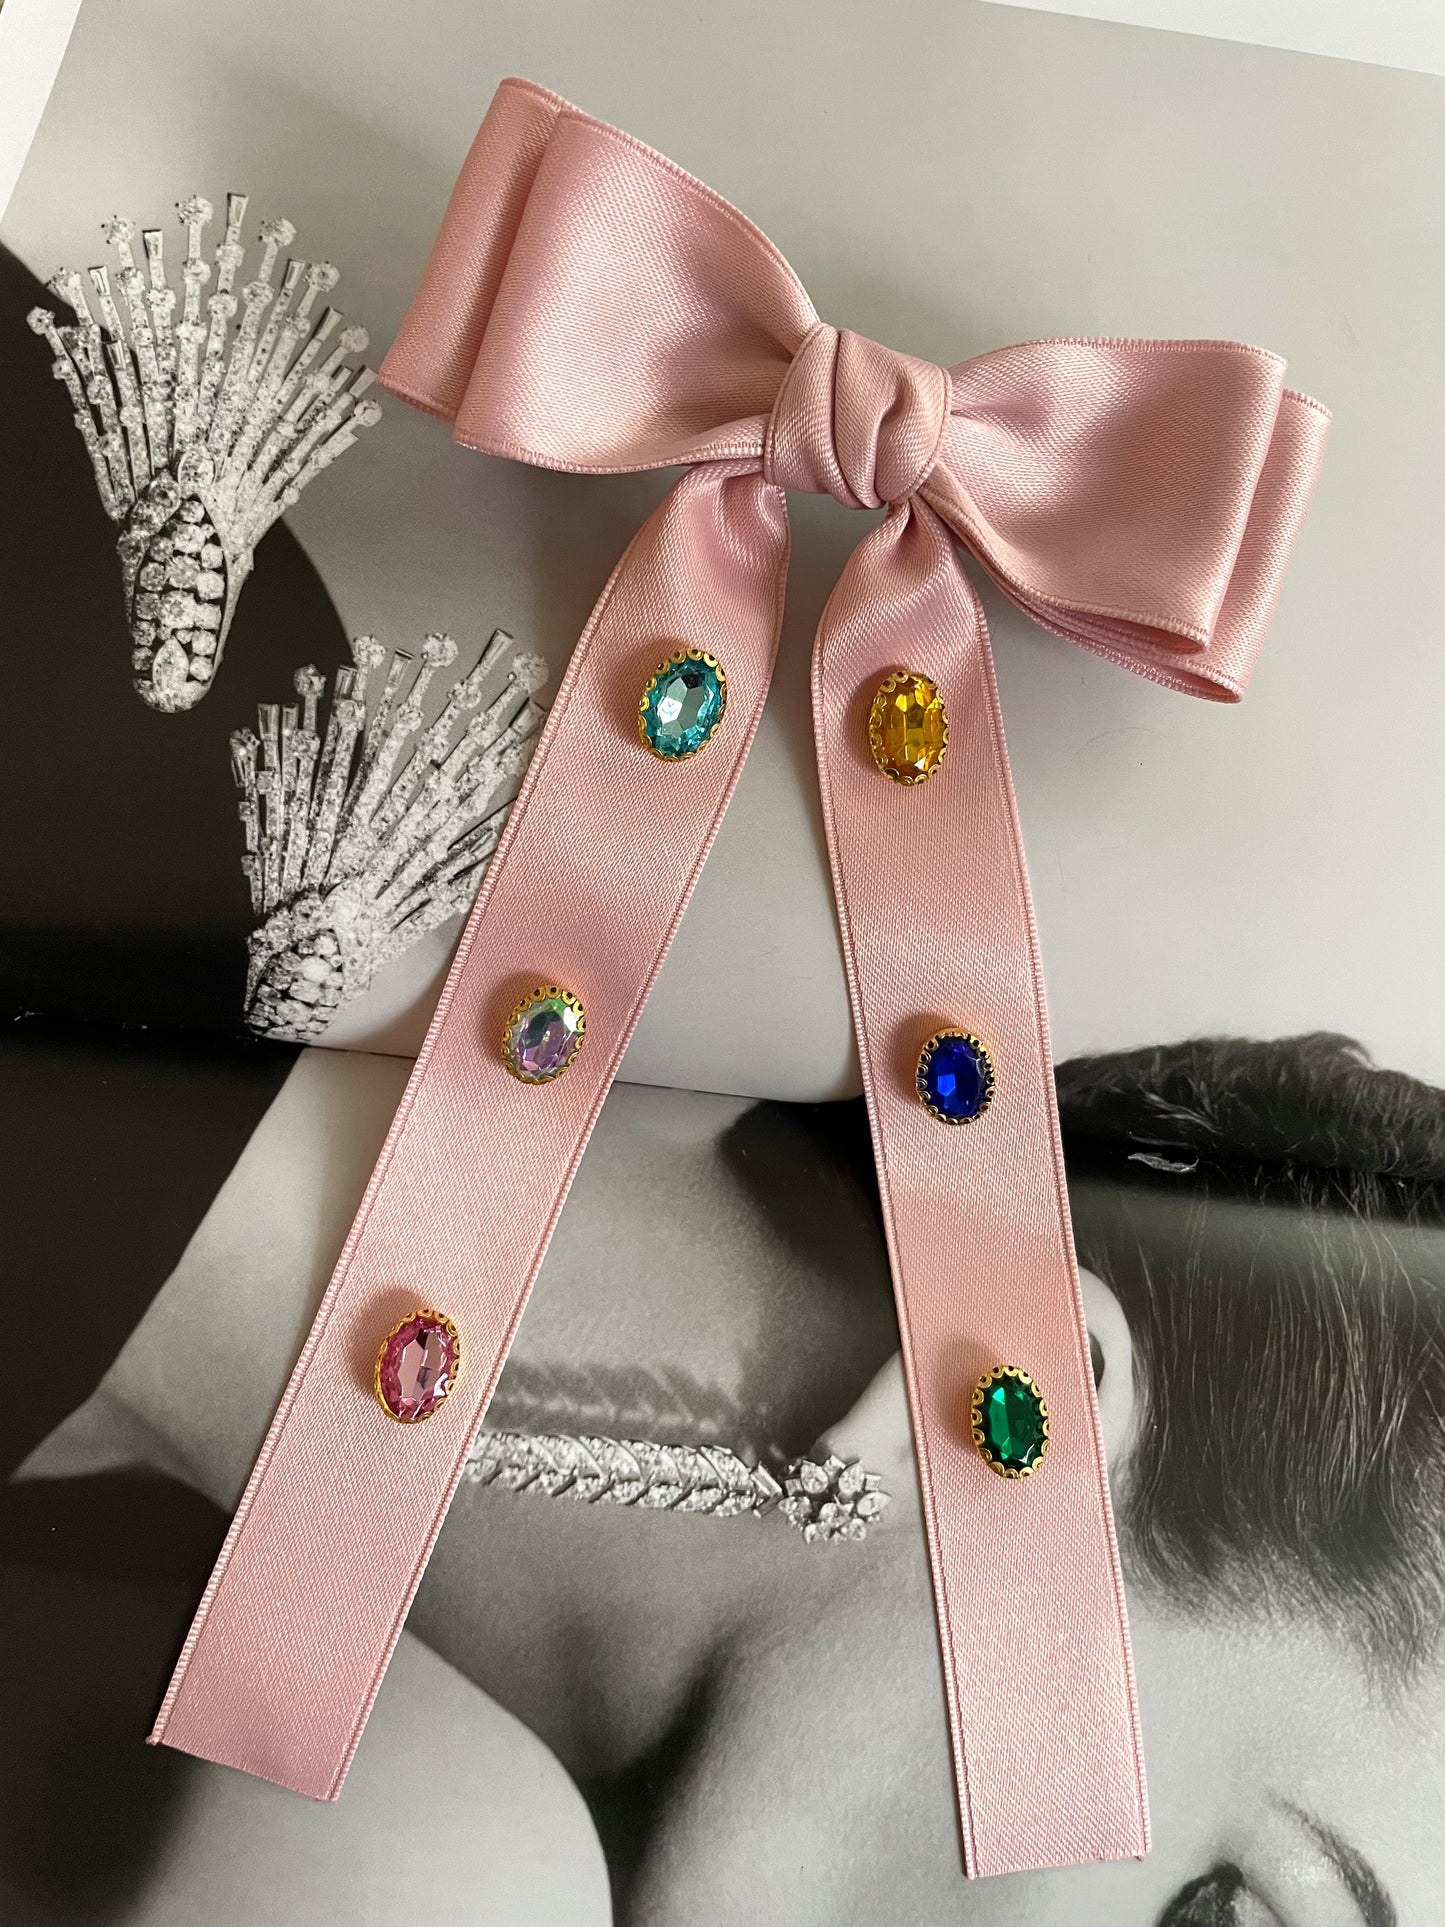 Embellished pink hair bow tie